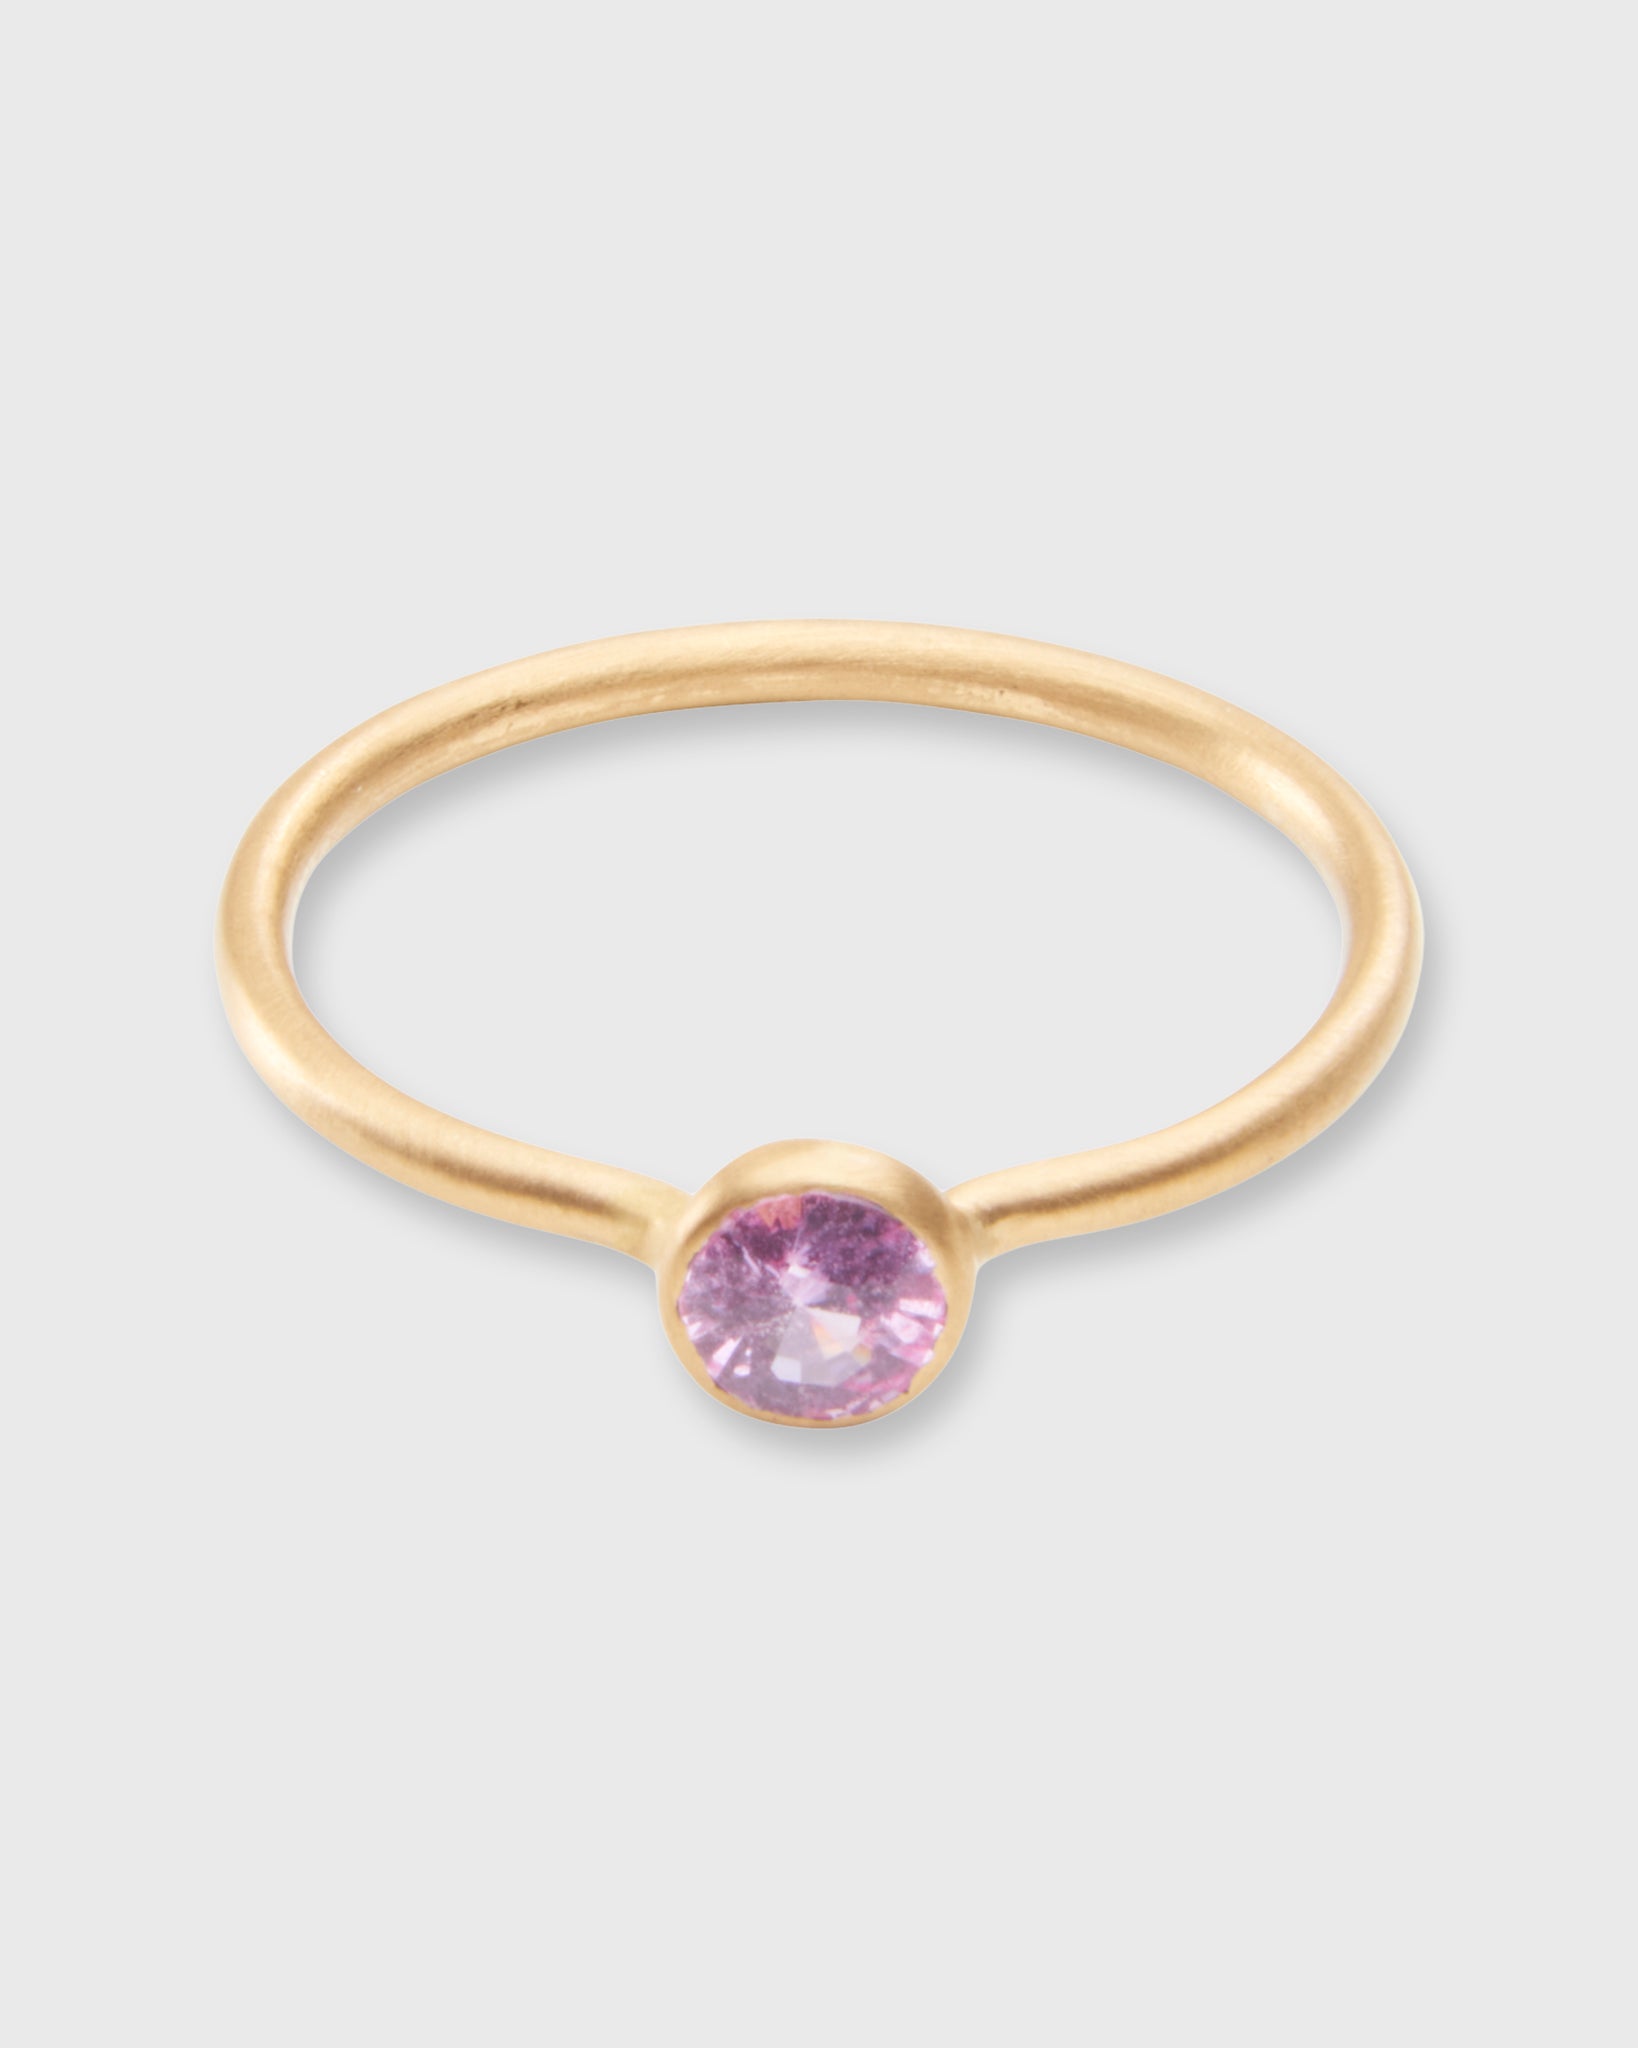 Miniature Princess Ring in Pink Sapphire